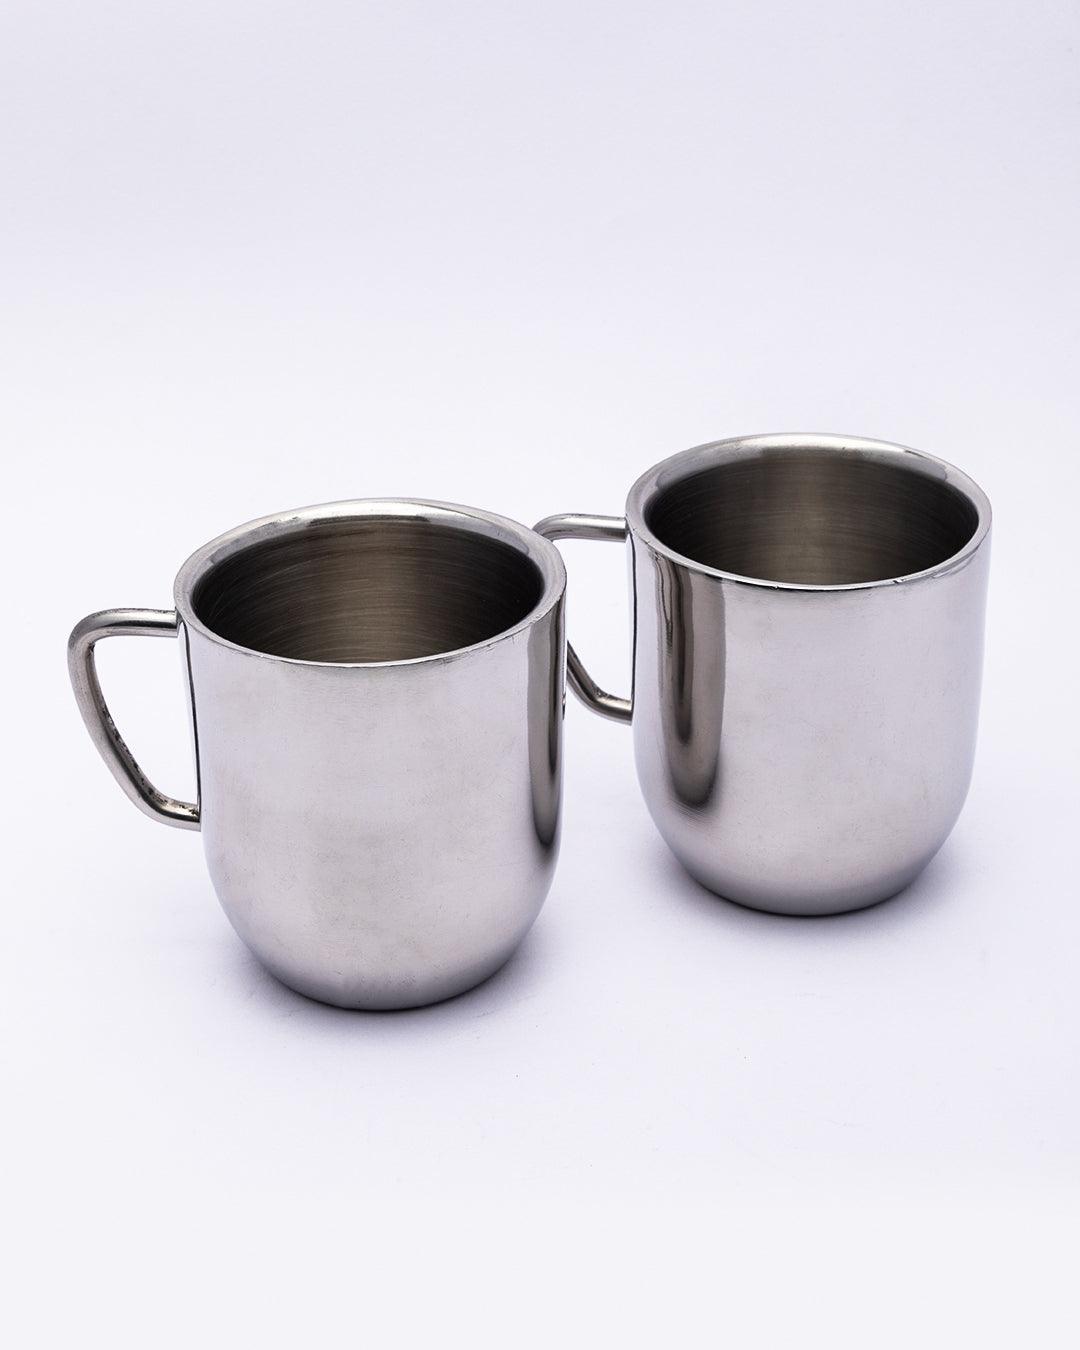 6 Pcs Stainless Steel Drinking Cup Soup Mugs Handles Metal Cups